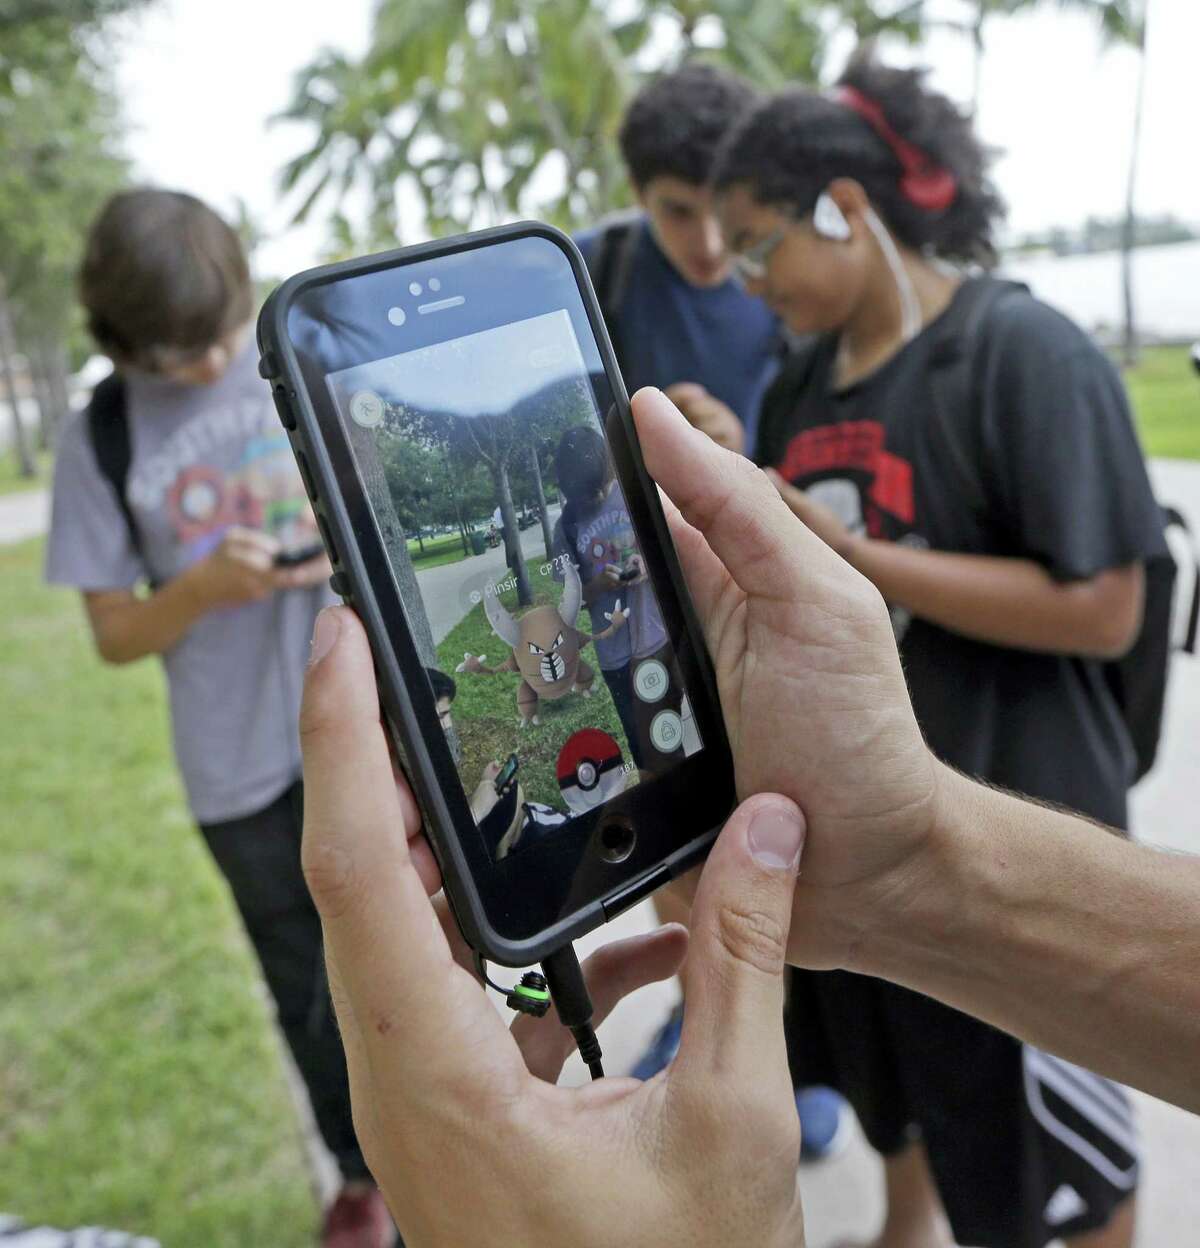 The “Pokemon Go” craze has sent legions of players hiking around cities and battling with “pocket monsters” on their smartphones.